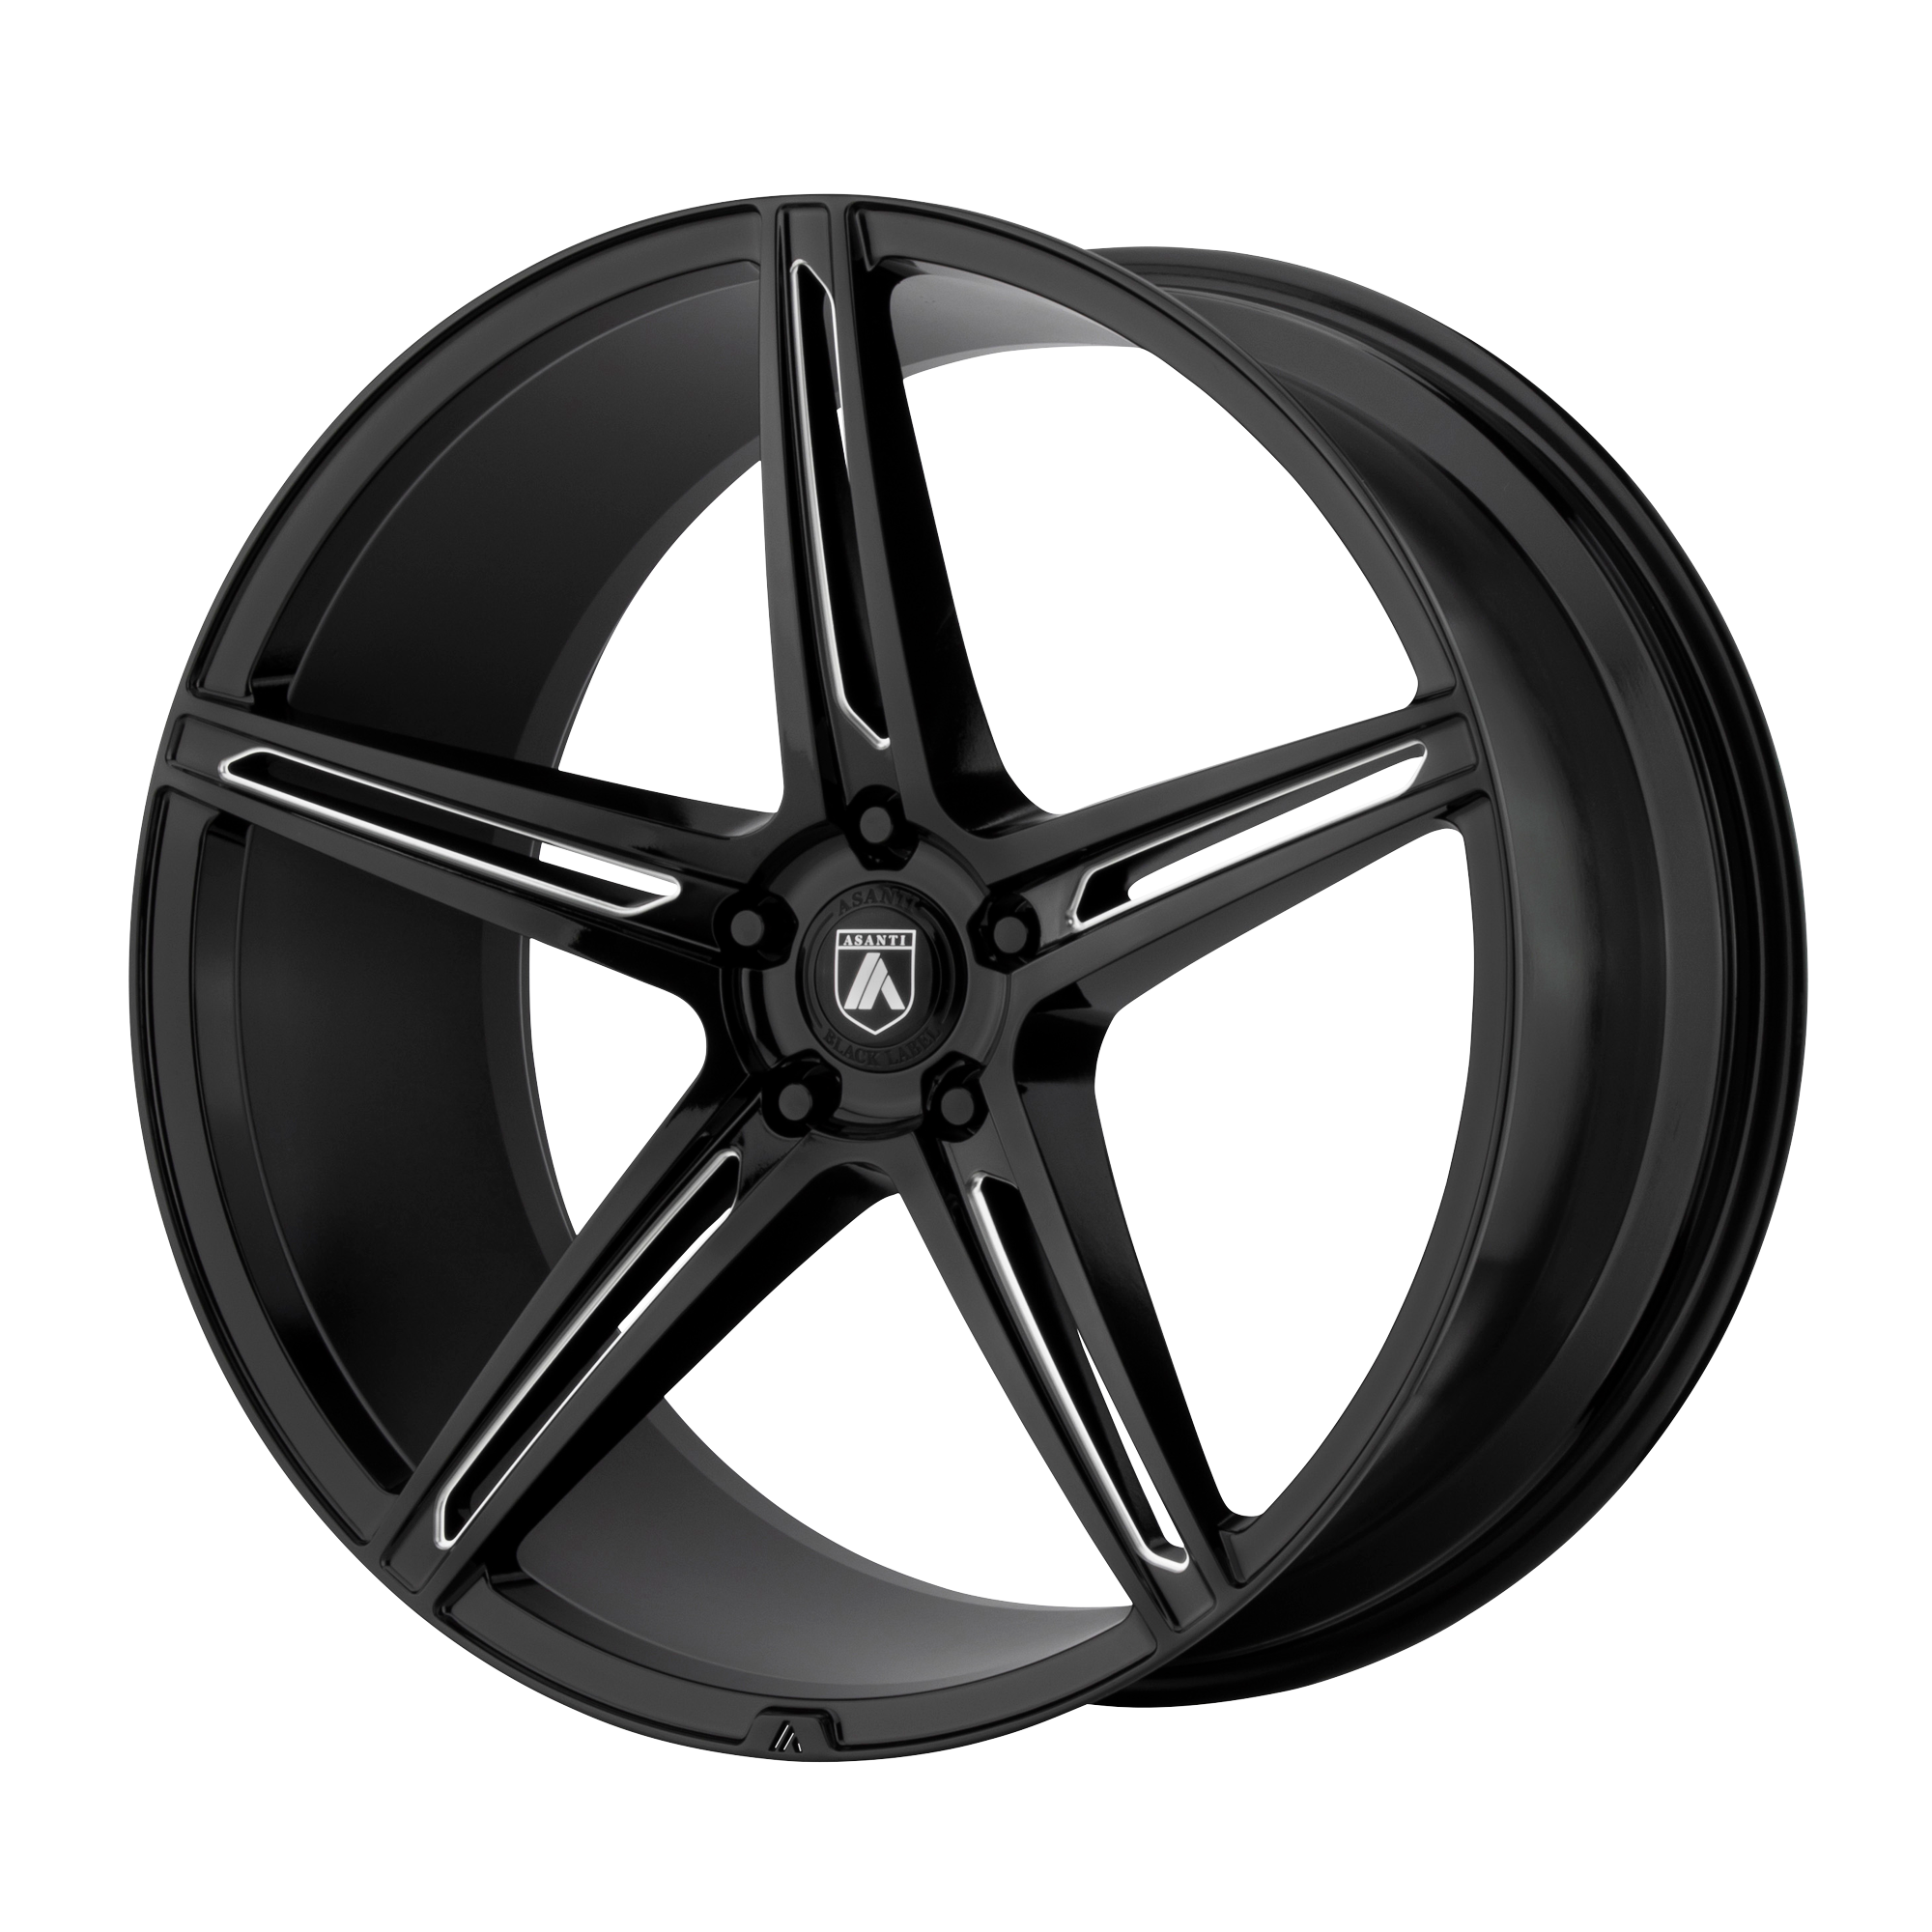 ALPHA 5 20x8.5 Blank GLOSS BLACK MILLED (38 mm) - Tires and Engine Performance